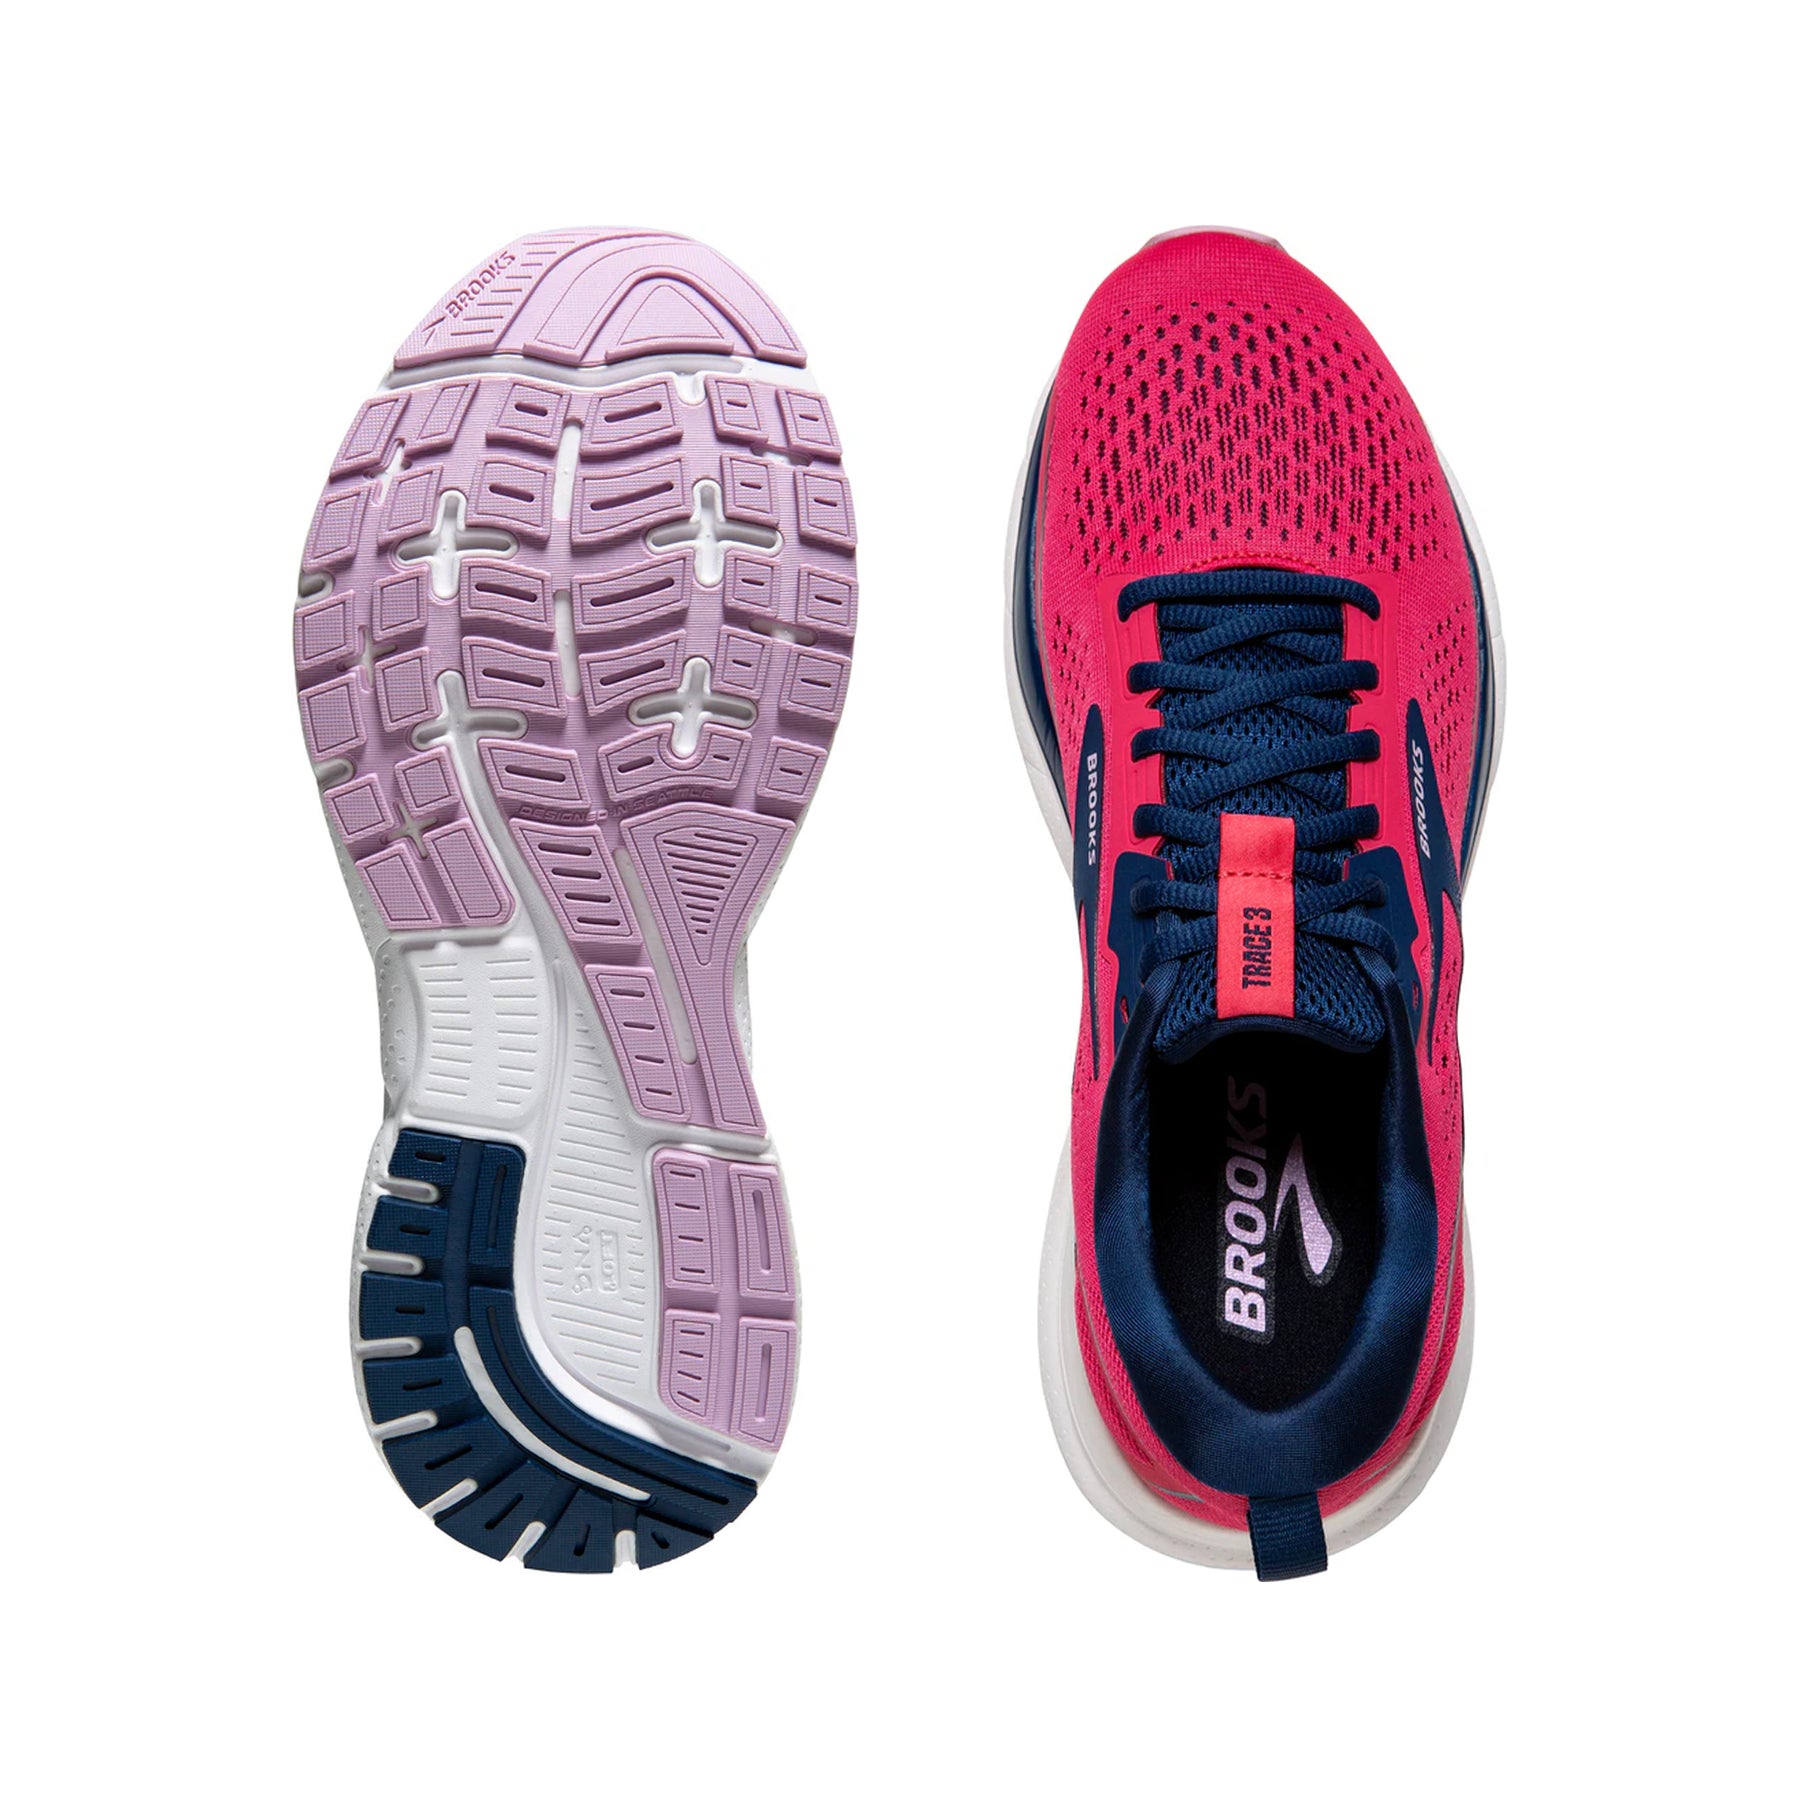 Brooks Trace 3 Womens Running Shoes: Raspberry/Blue/Orchid